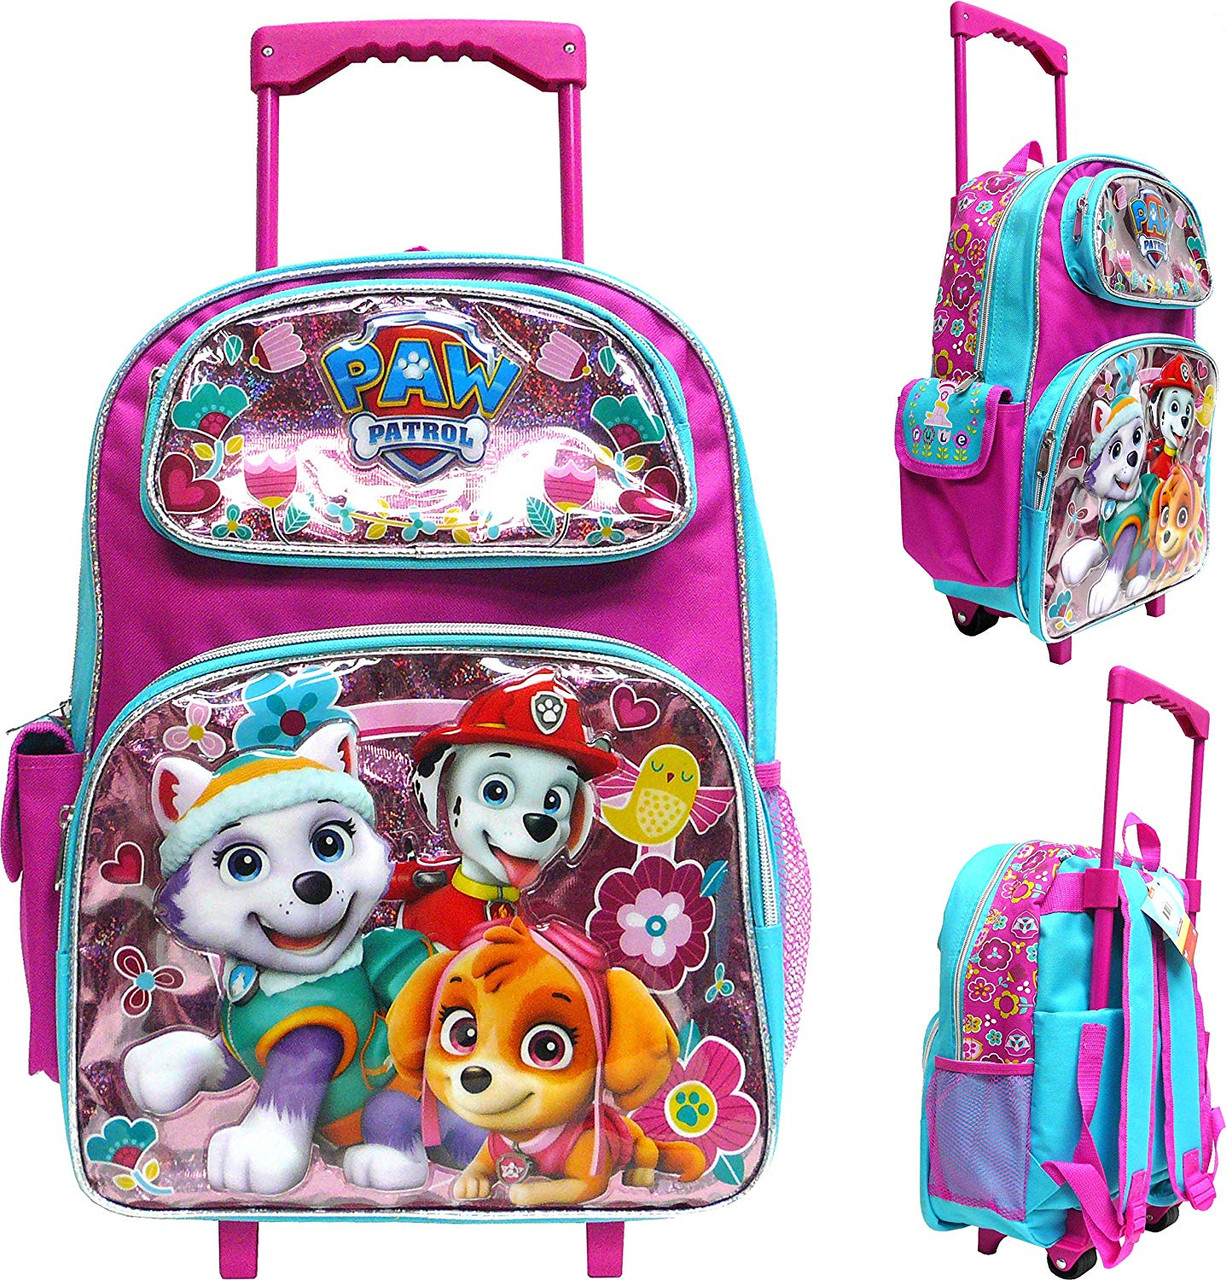 Paw Patrol Rolling Backpack 16" Rolling Backpack Roller Luggage Lunch Bag 2 pcs 